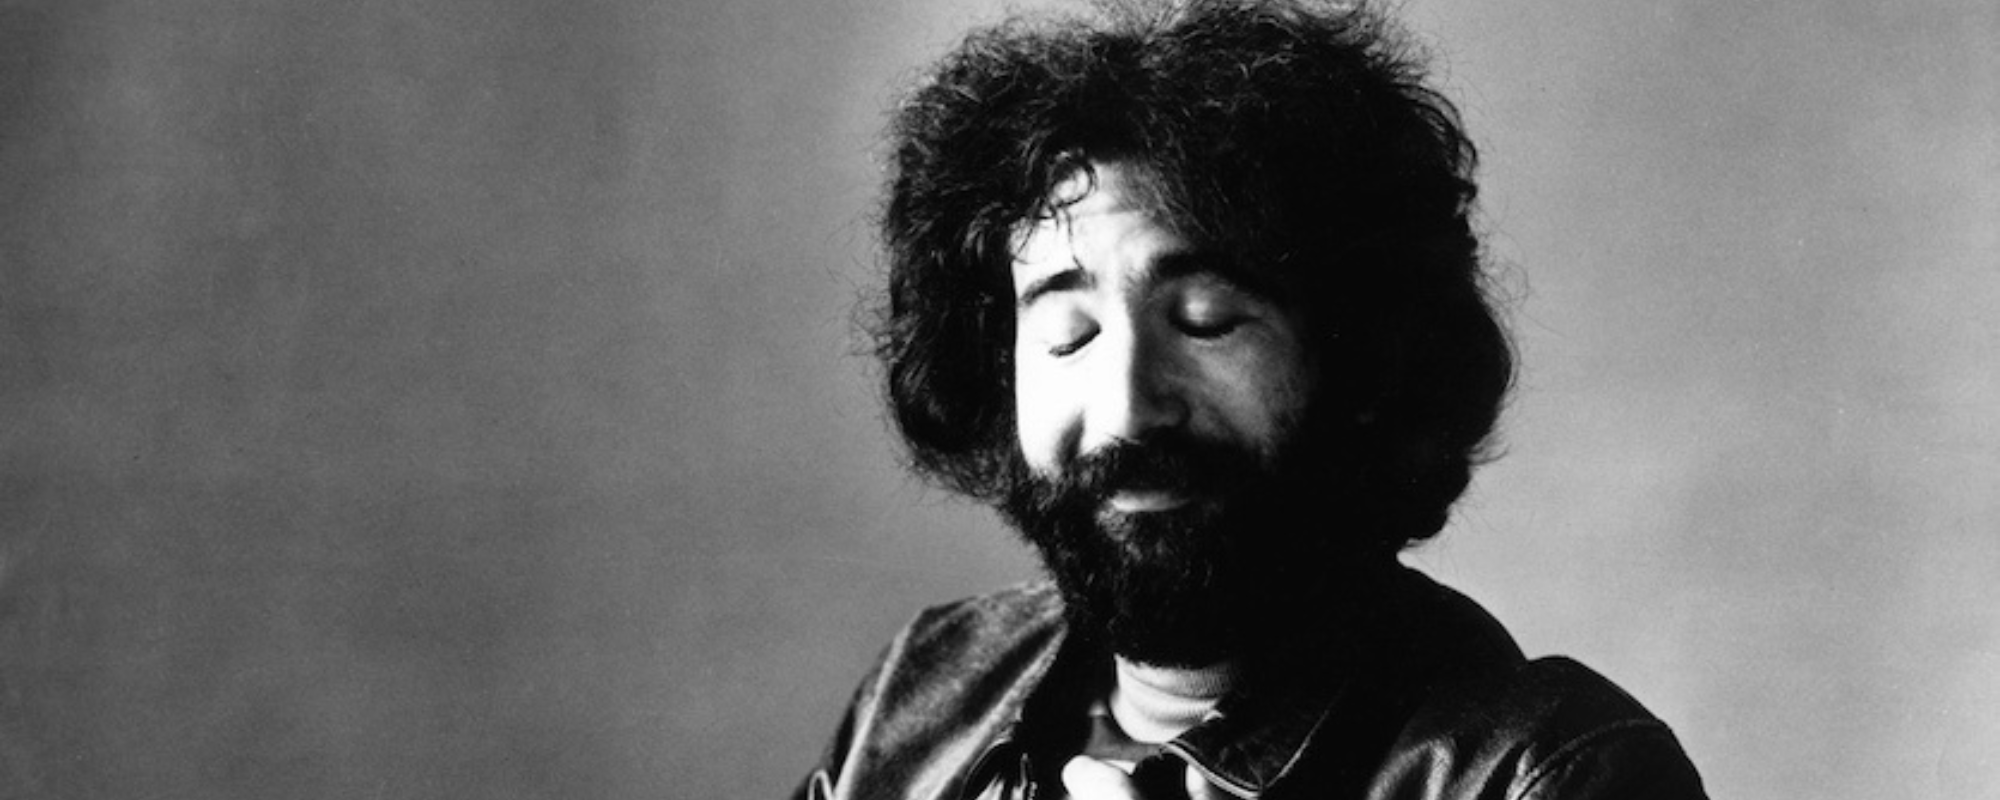 The Grateful Dead Start ’30 Days of Dead’ with Rare Track “Comes a Time”